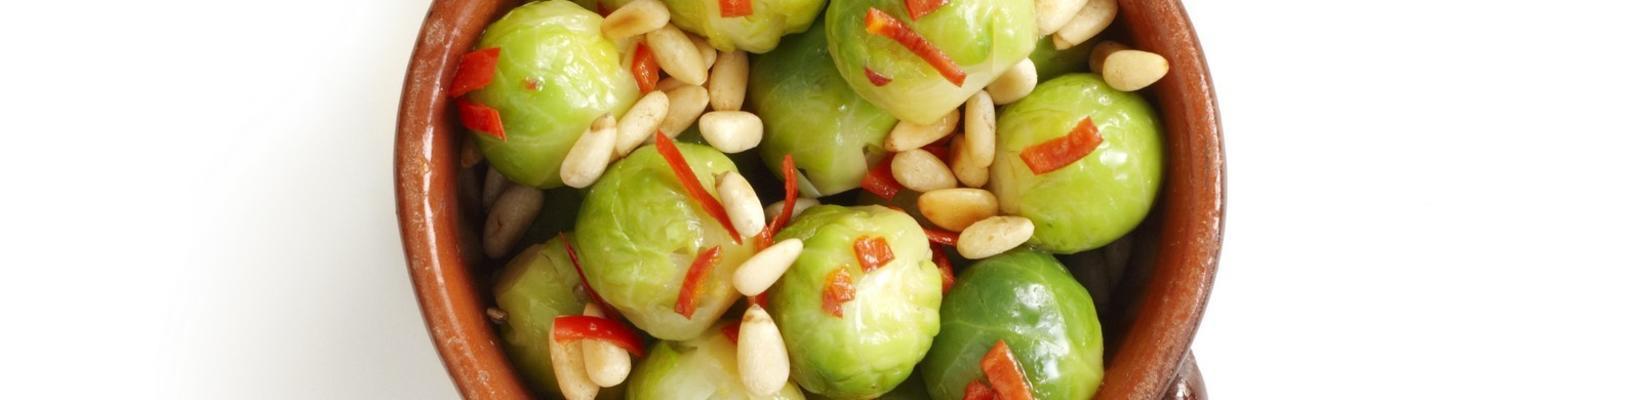 spicy sprouts with roasted pine nuts